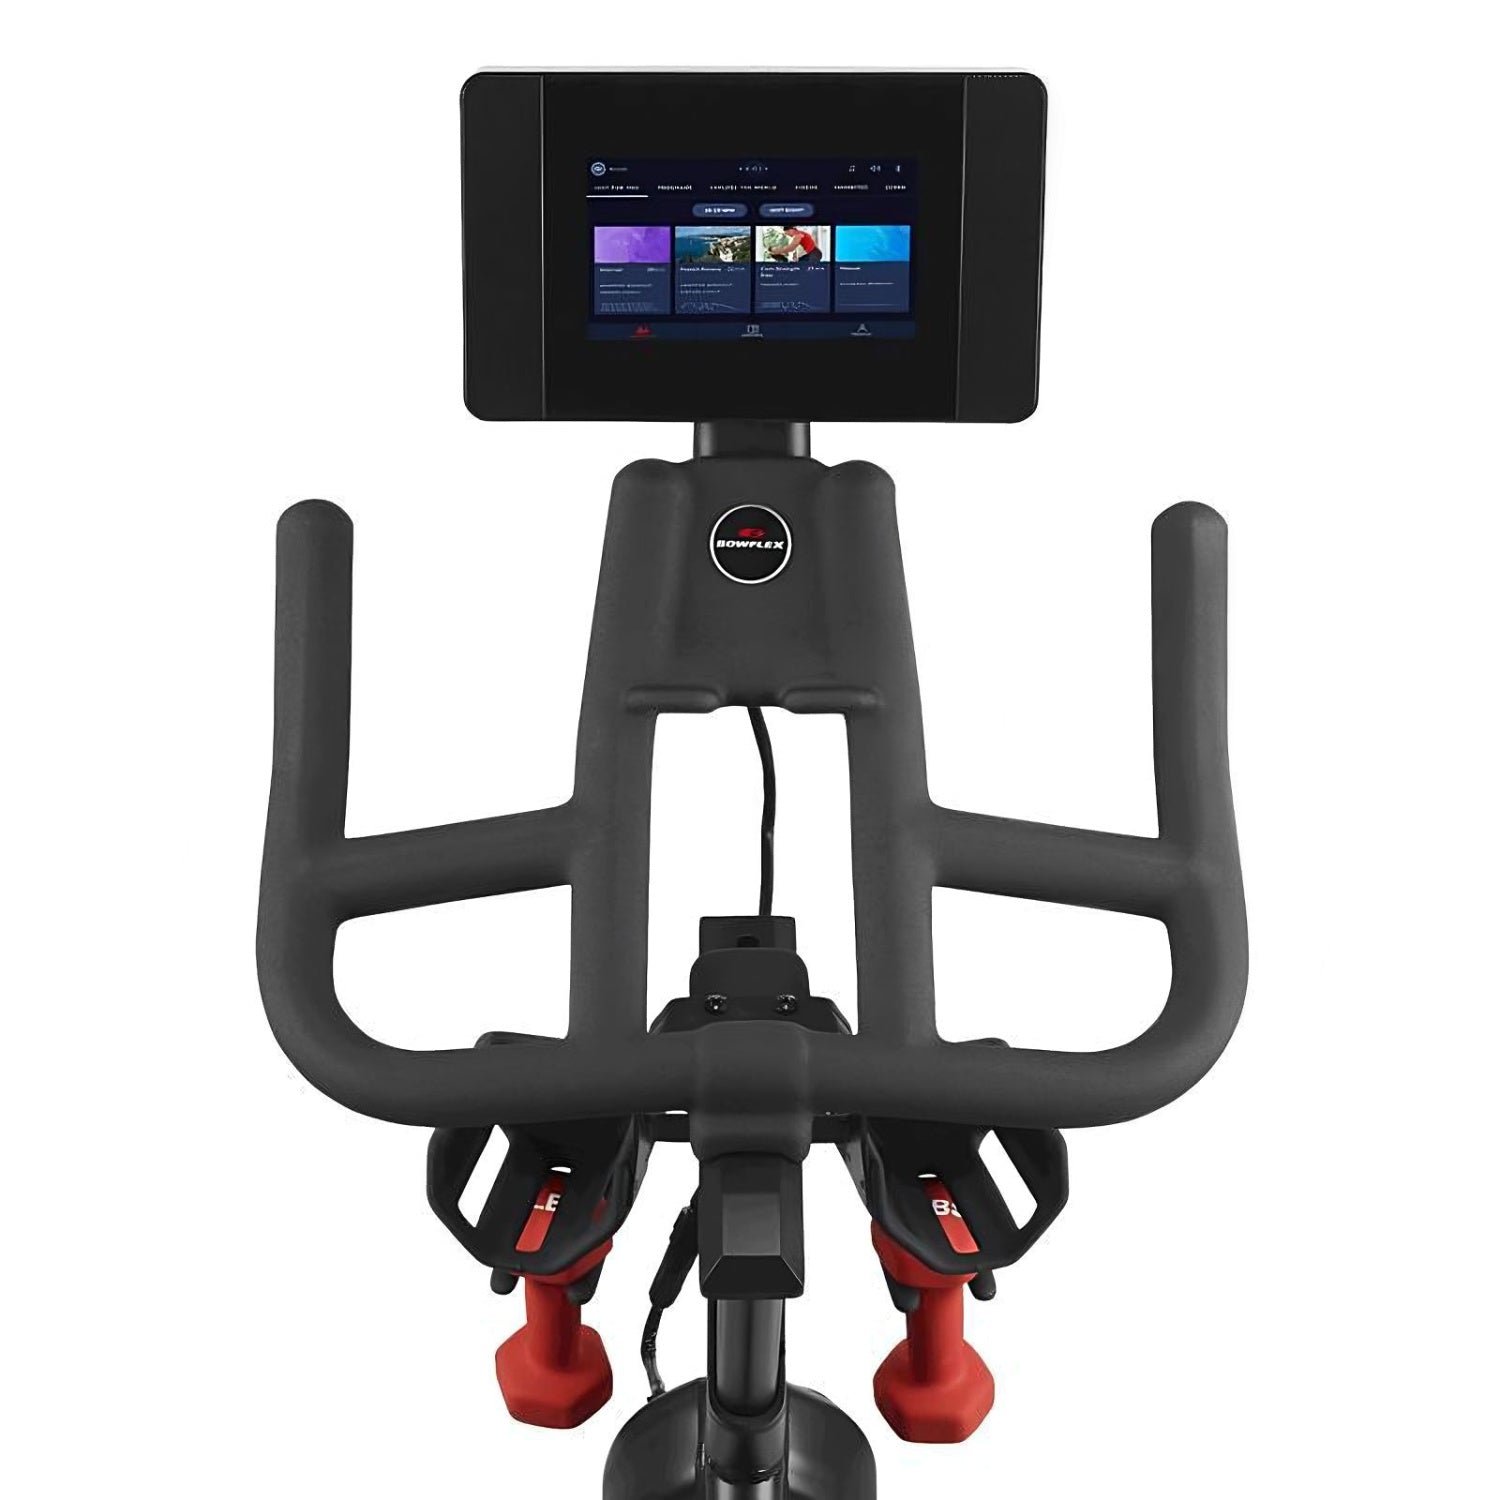 -Spin Bikes-Gym Direct